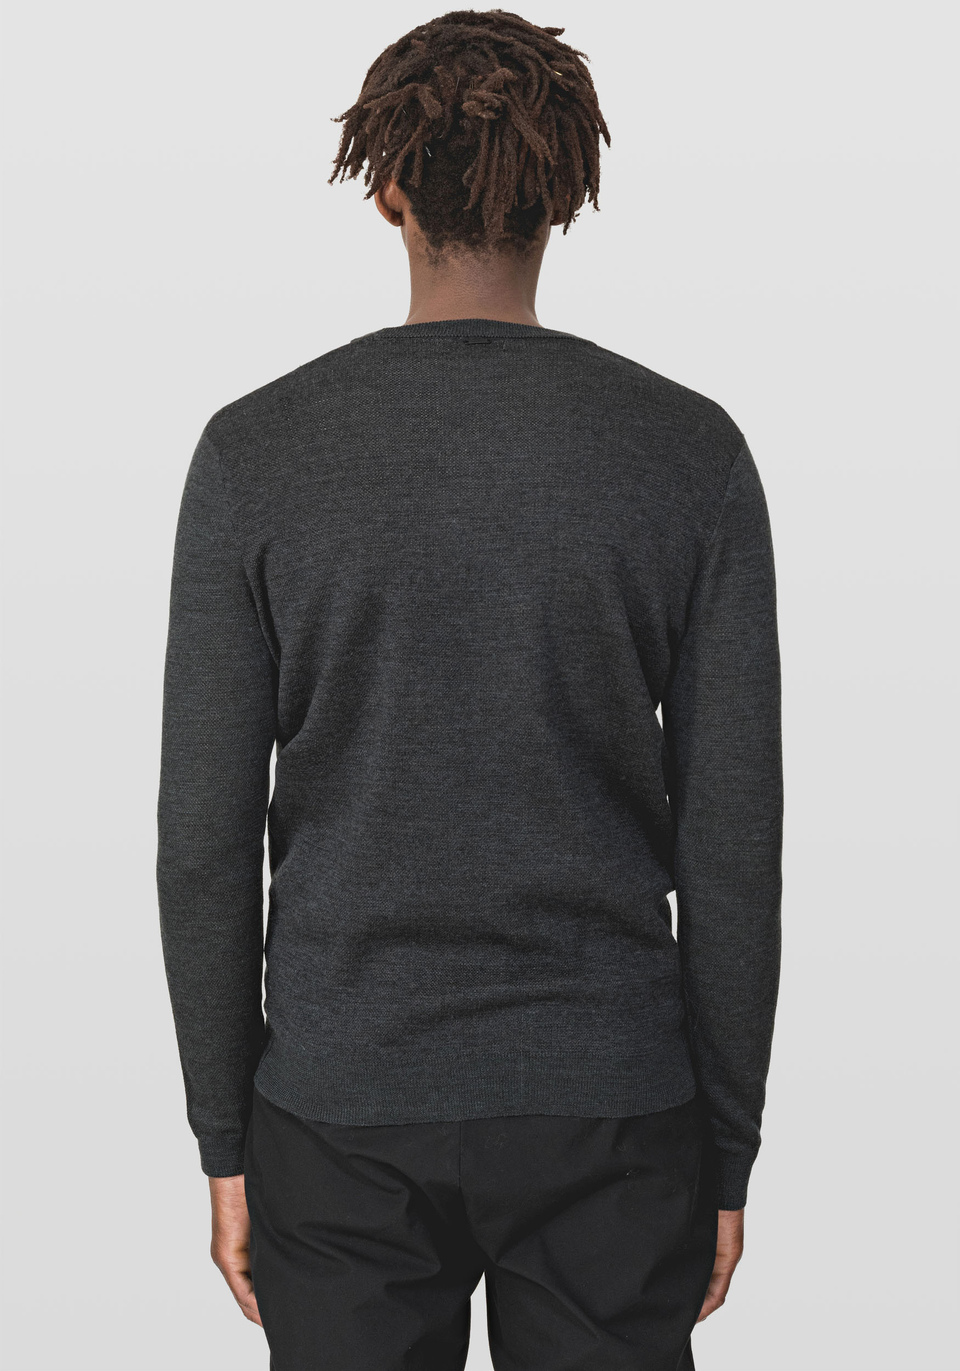 SWEATER IN SOFT WOOL-BLEND YARN WITH CONTRASTING DESIGN - Antony Morato Online Shop